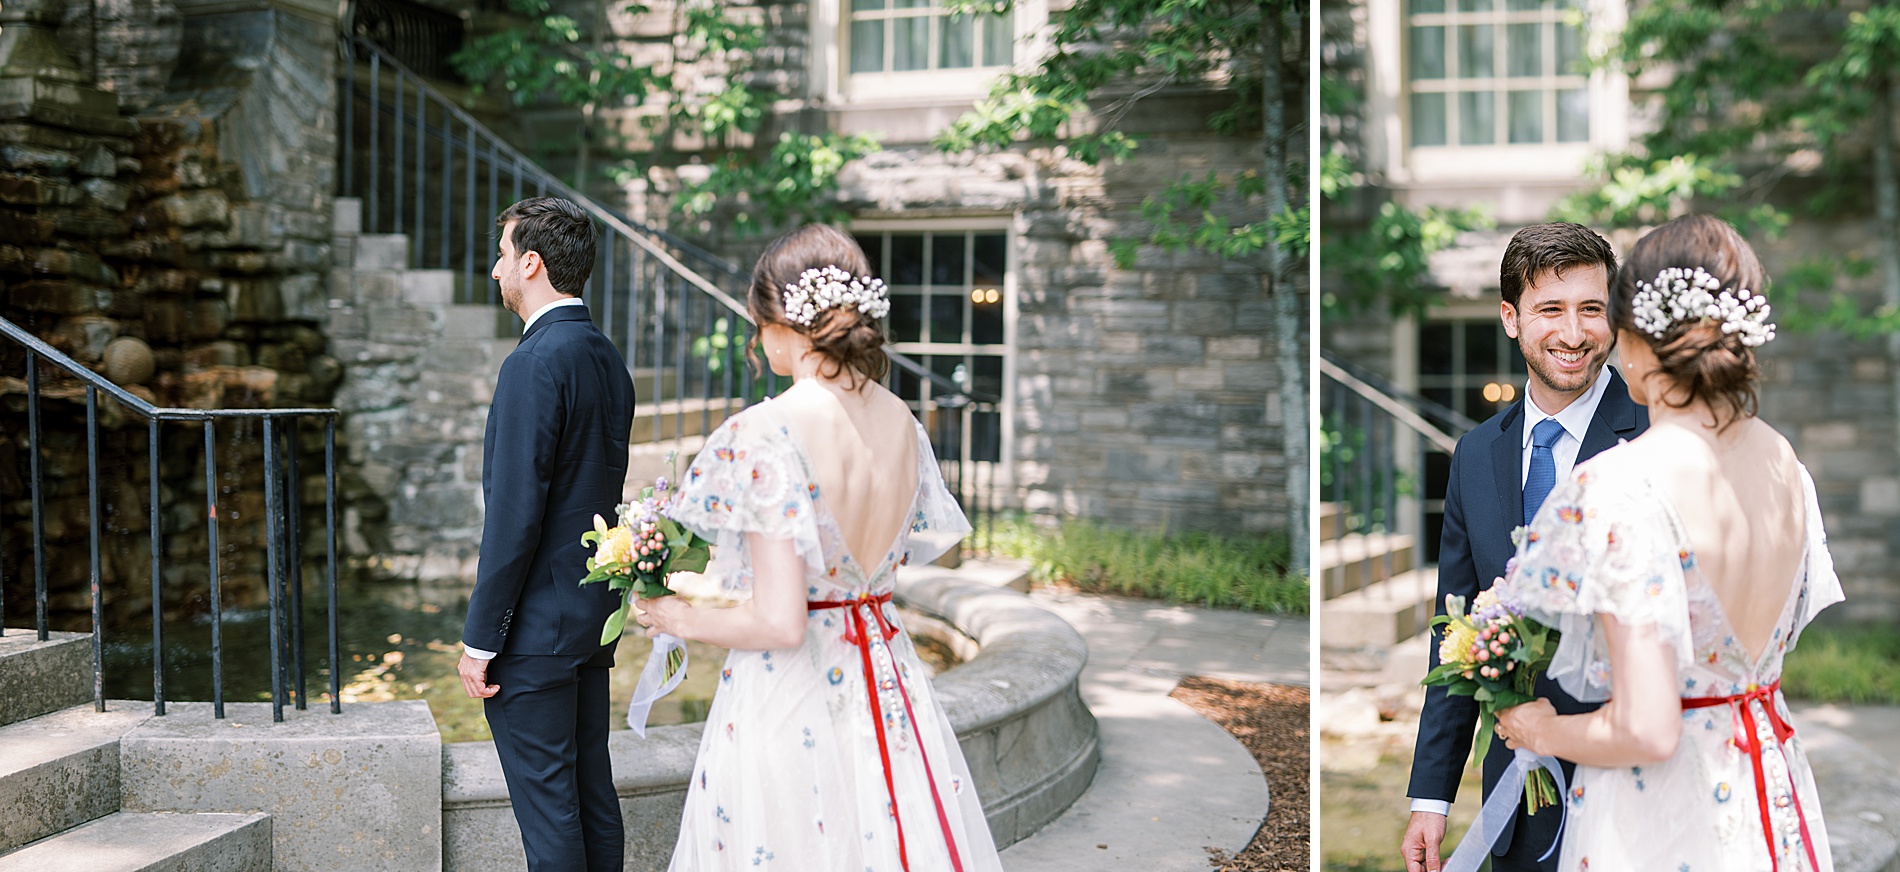 first look moment from Romantic Elopement at Cheekwood Estate & Gardens